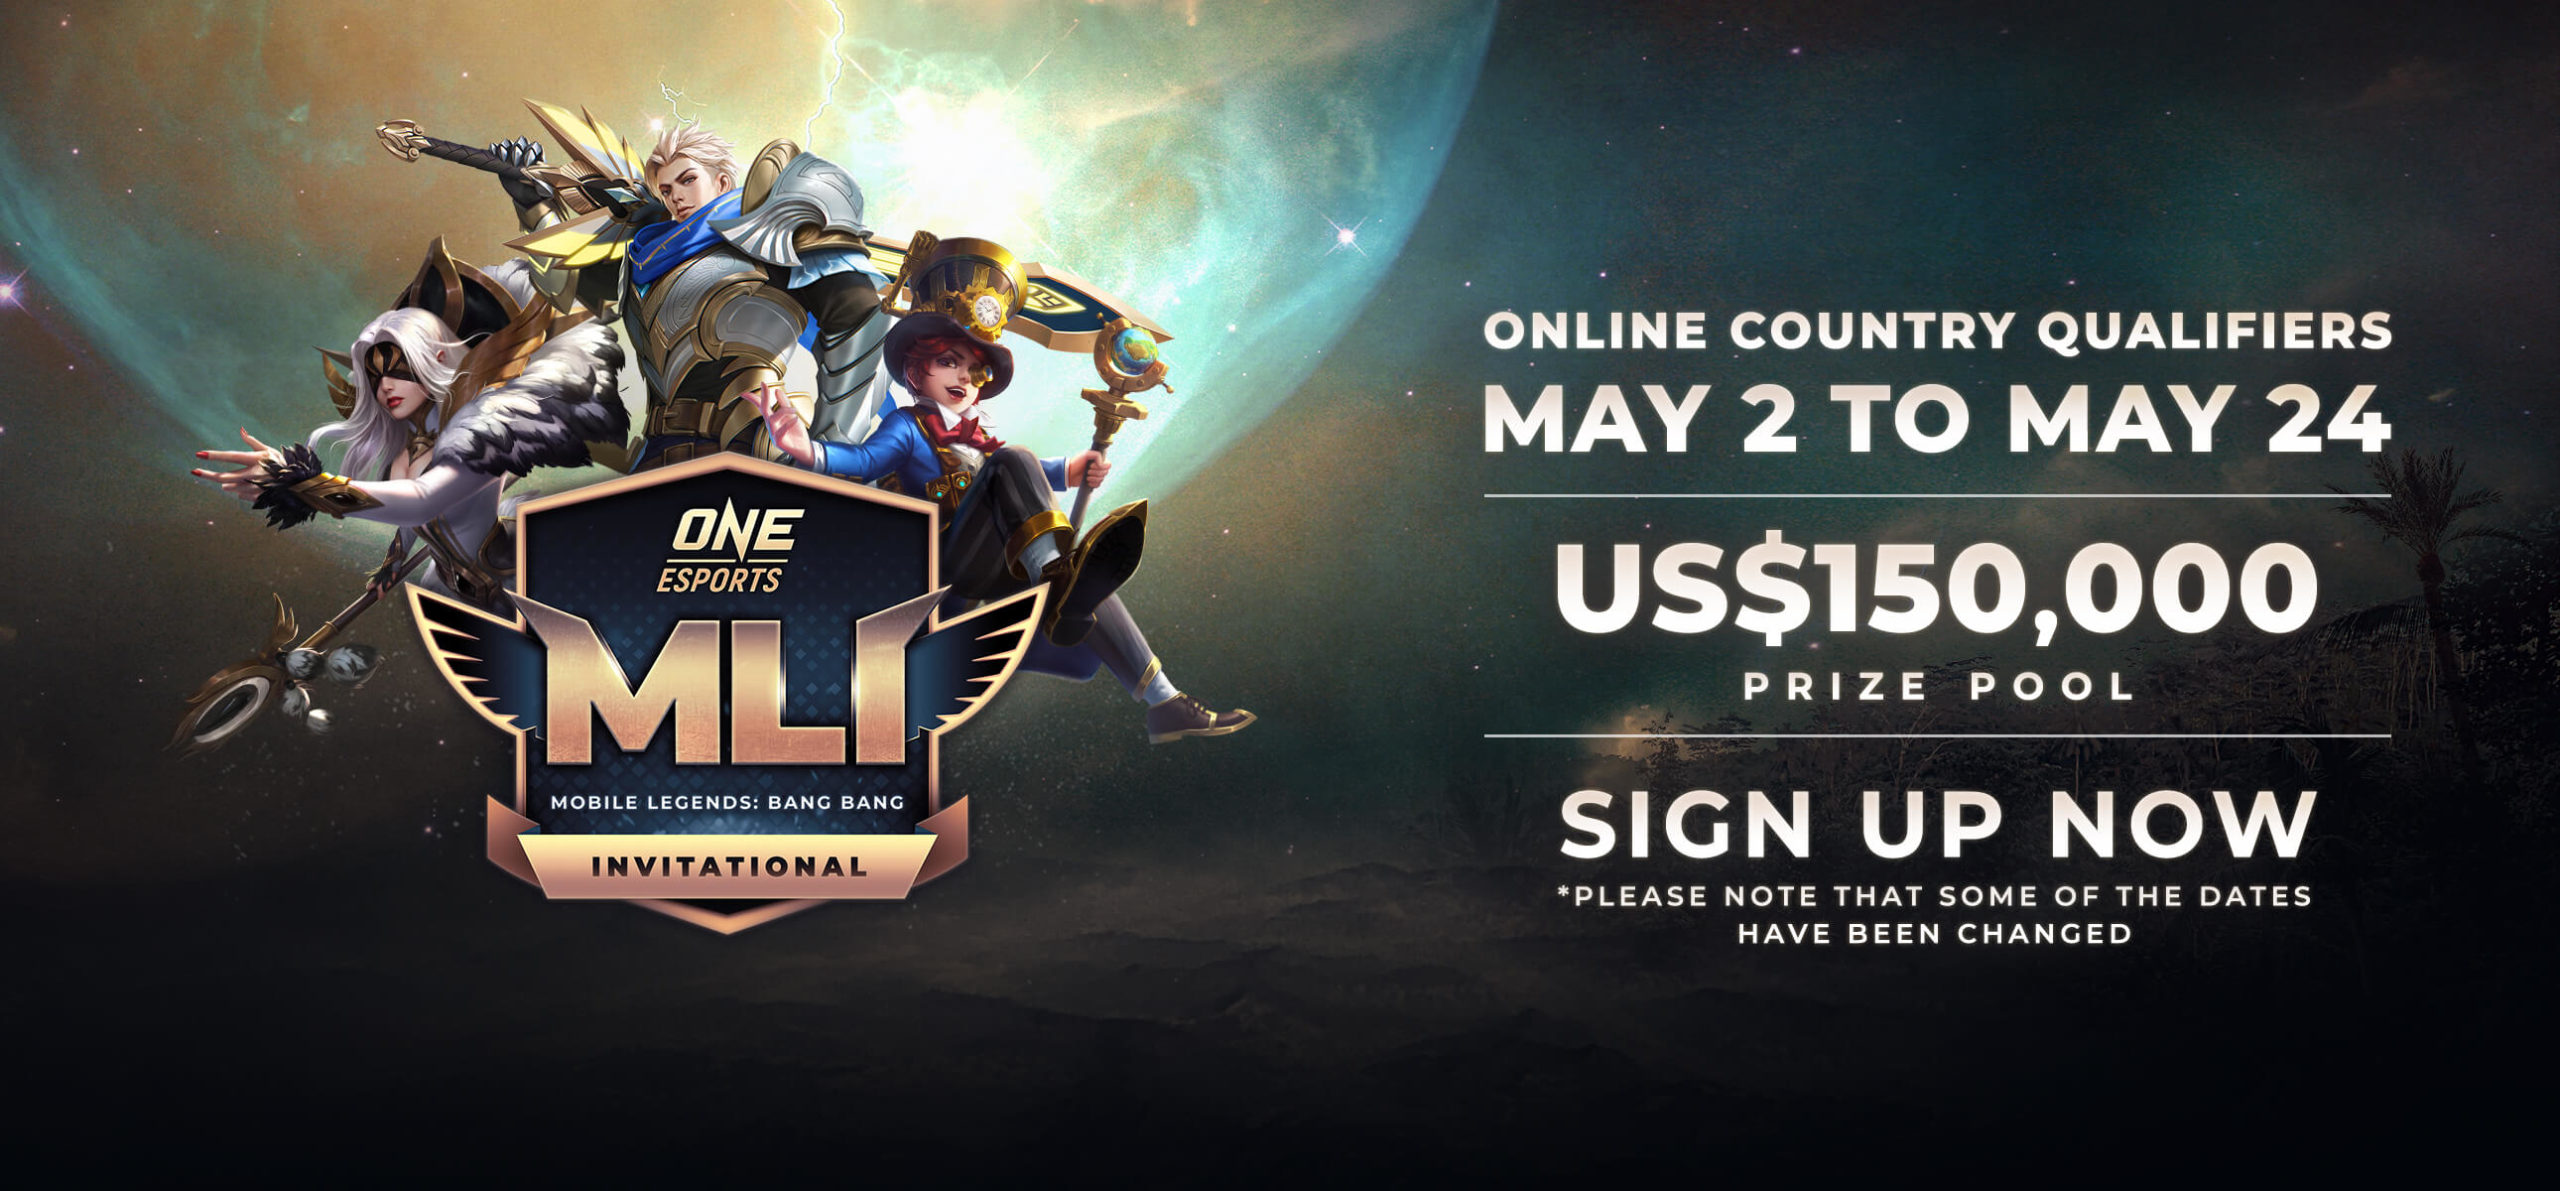 You are currently viewing MOBILE LEGENDS Tournament  US$150,000 Prize